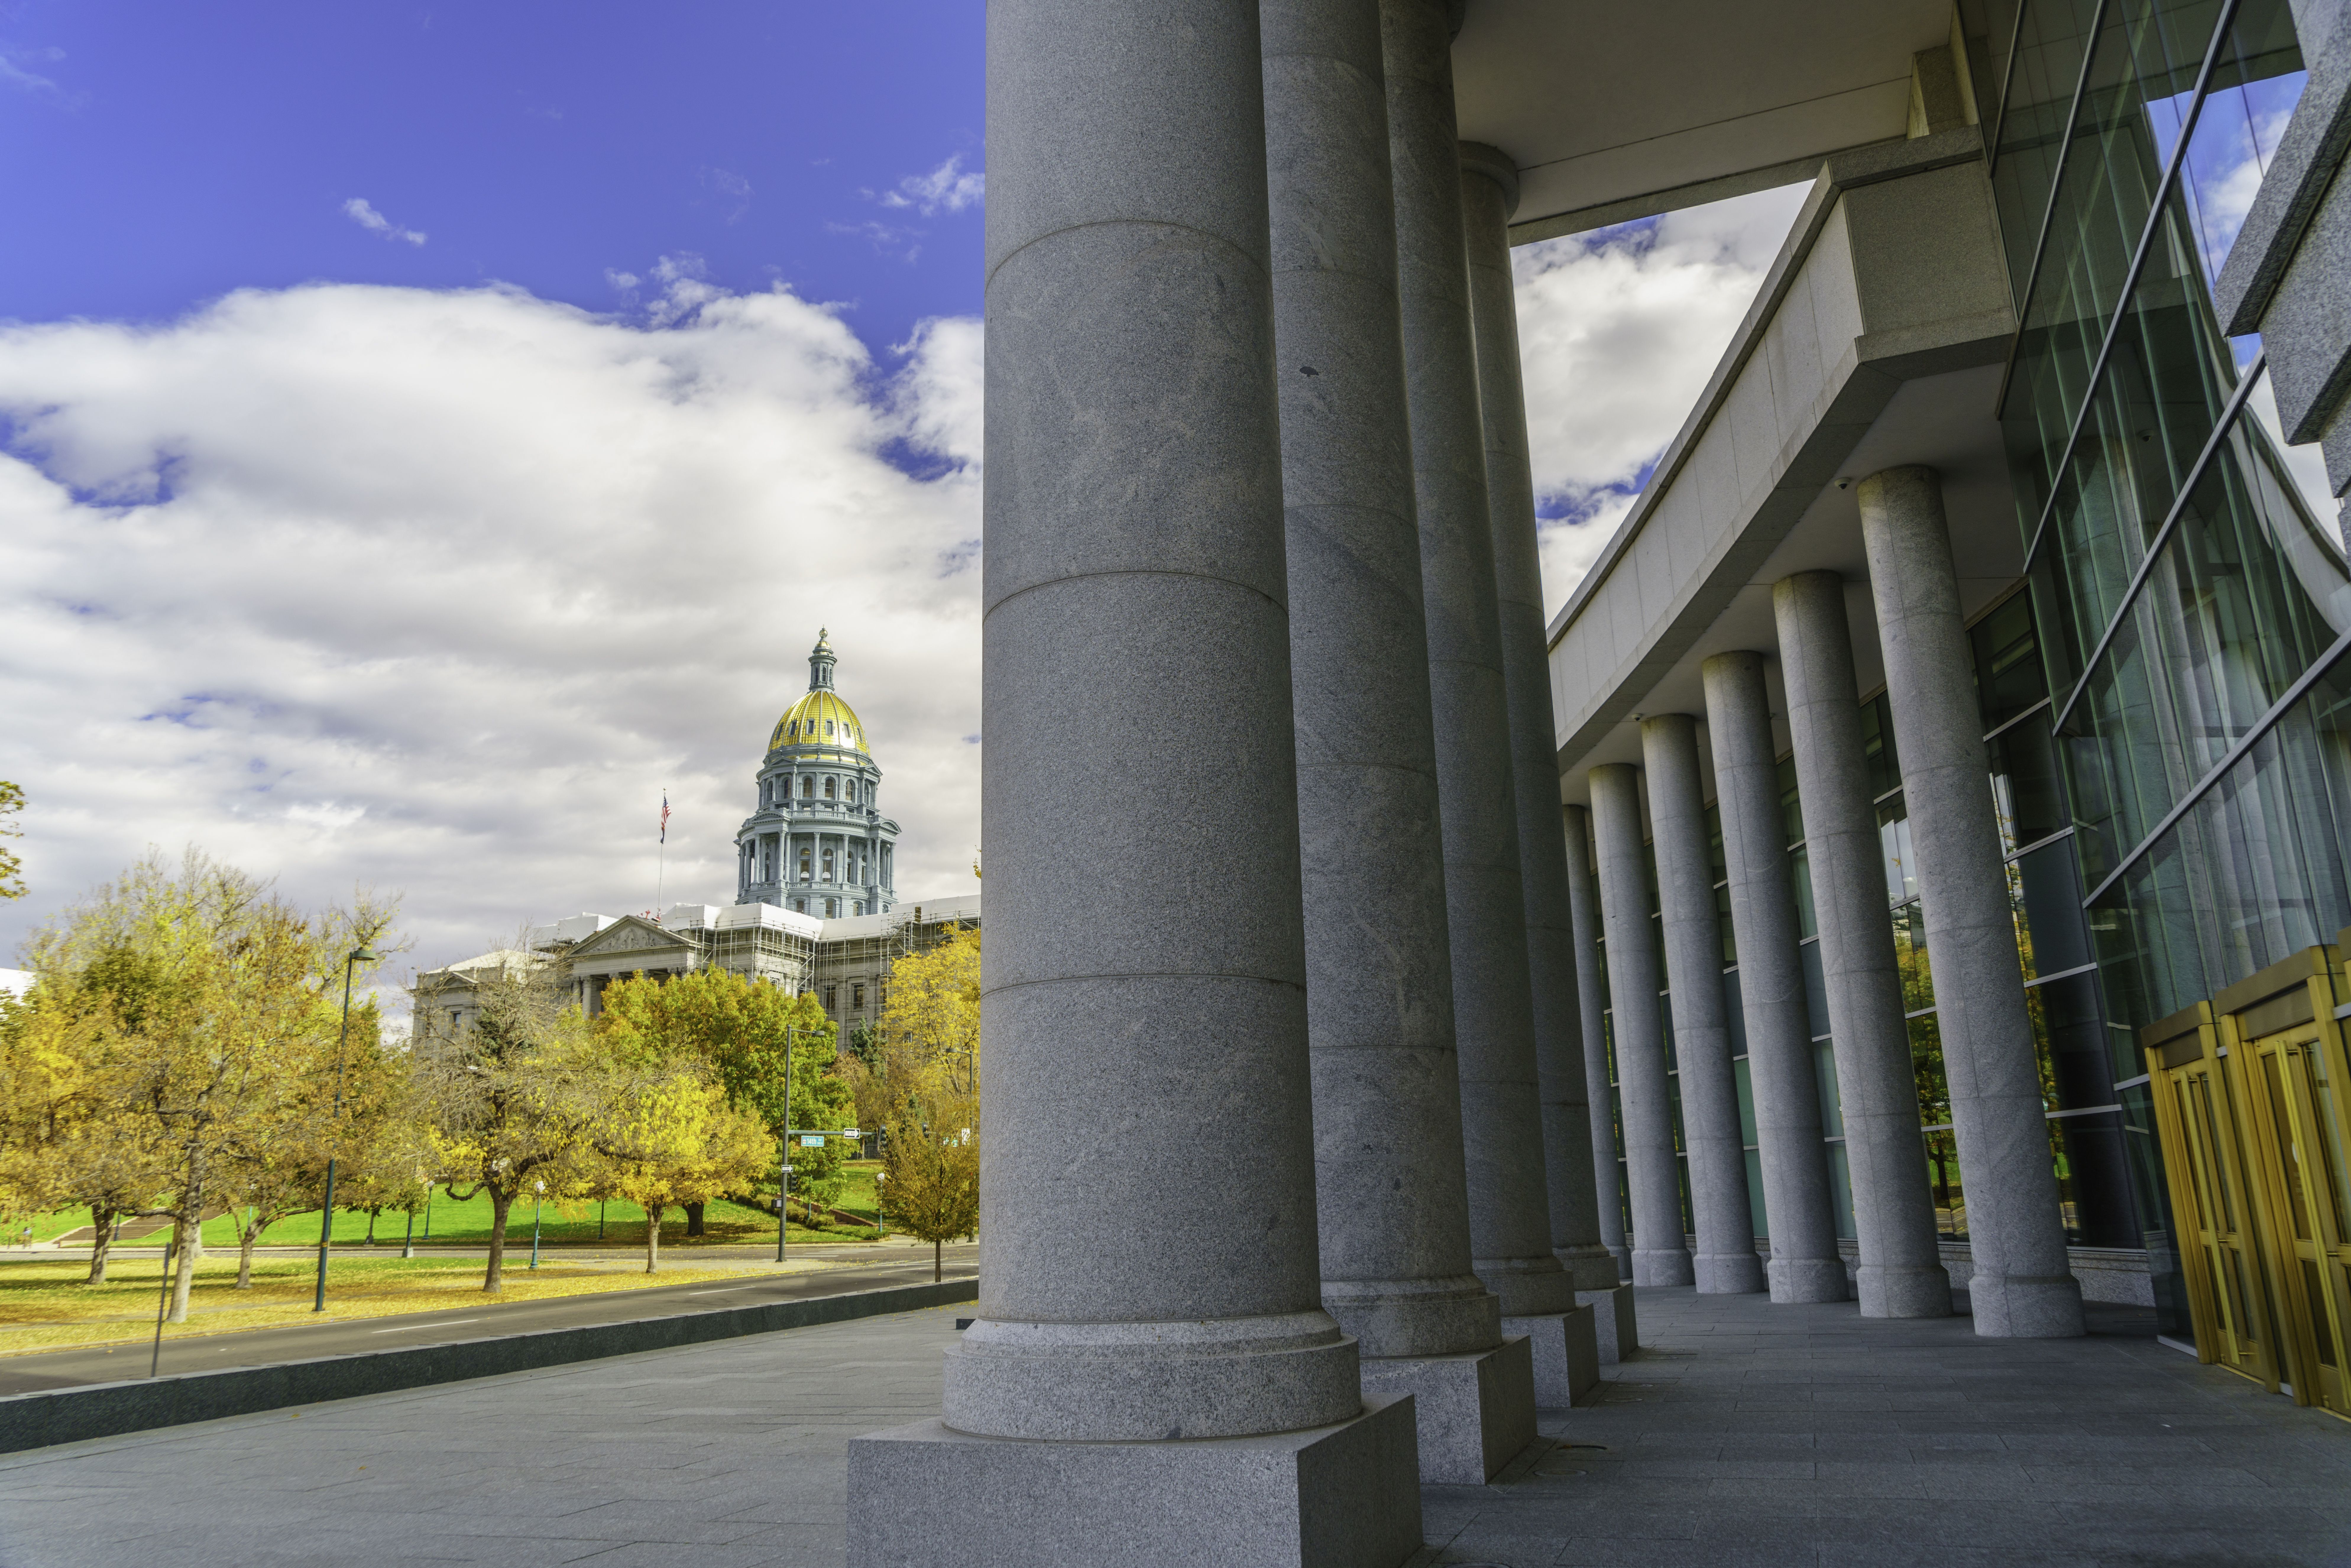 Front steps of the Ralph Carr Judicial Center in Denver, home of the Colorado Supreme Court and Court of Appeals, looking across toward the Colorado State Capitol building